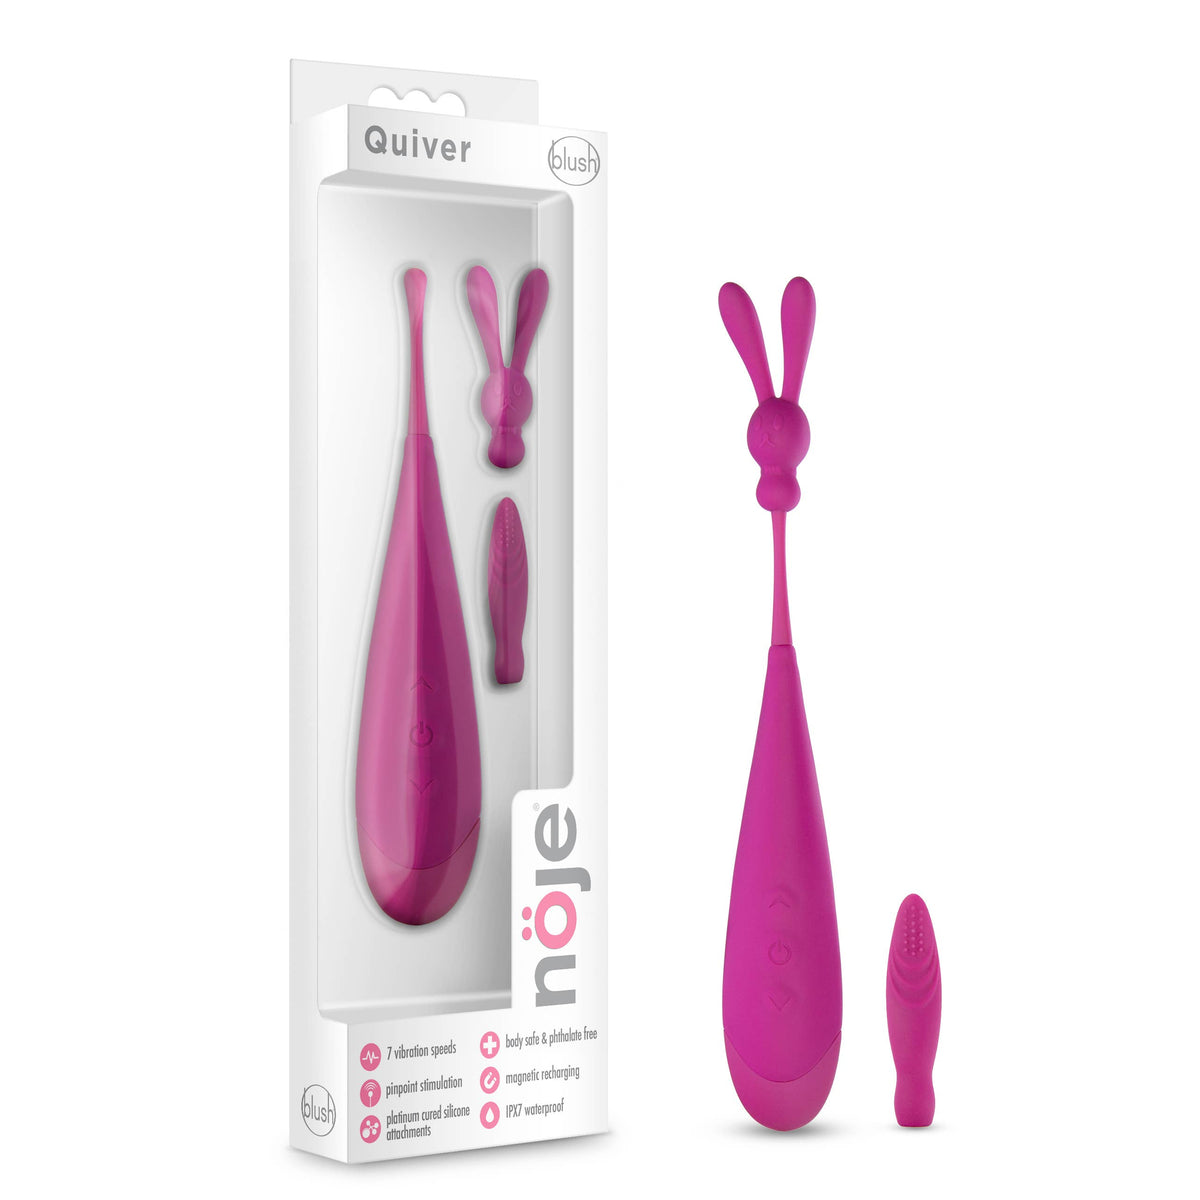 Quiver - Ultrasonic Oscillating Vibrator - Rechareable- Lily